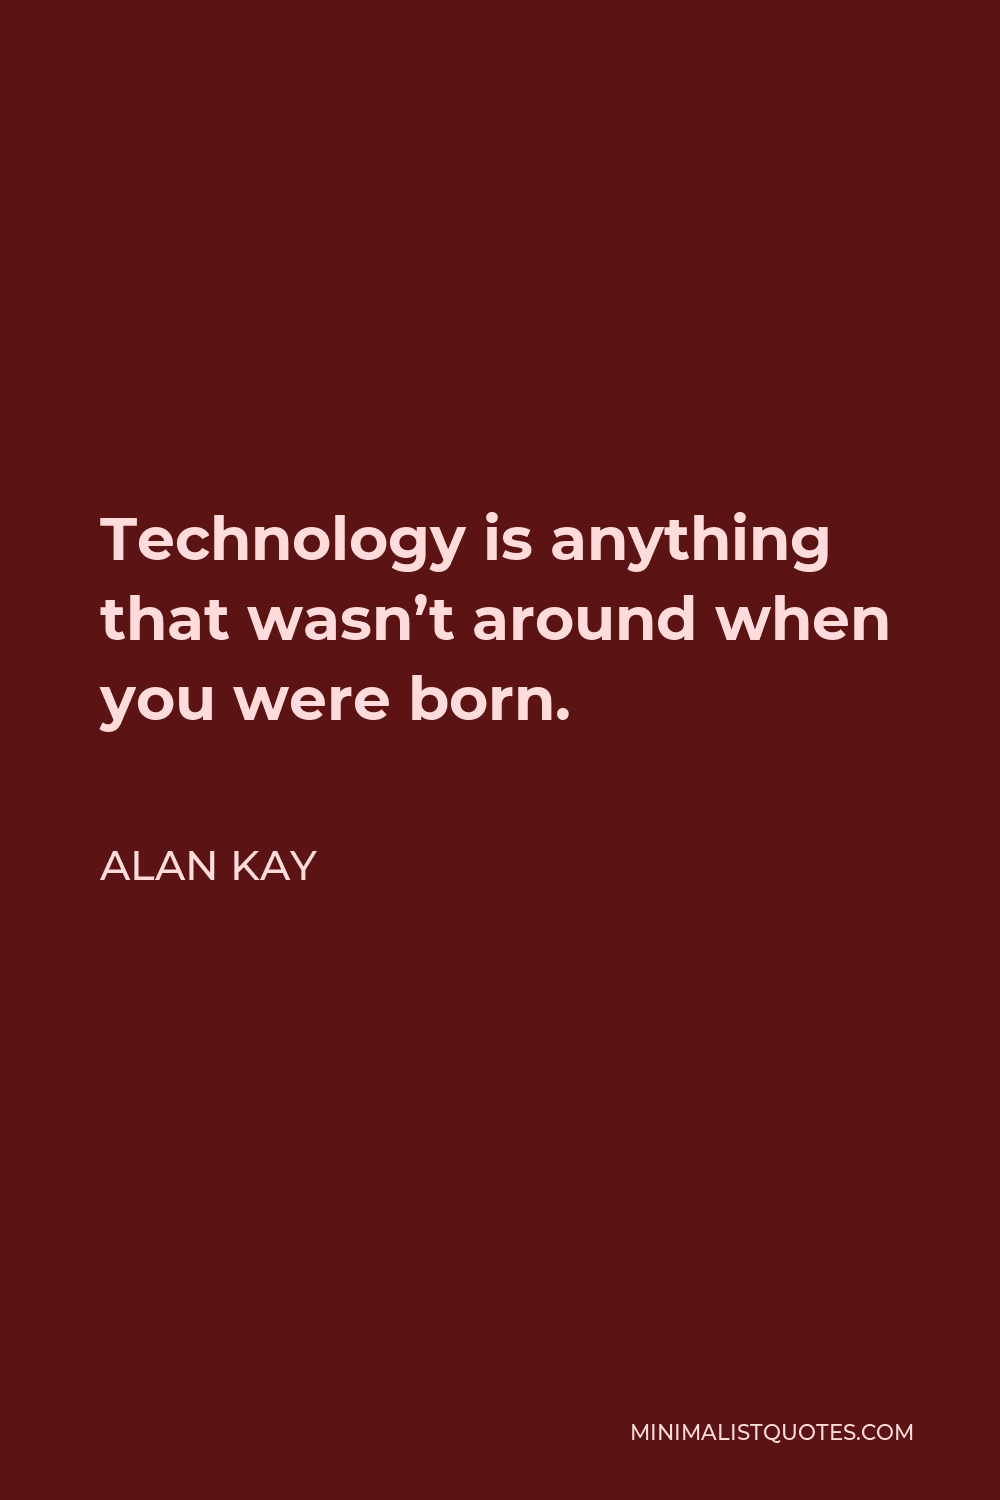 Alan Kay Quote - Technology is anything that wasn’t around when you were born.